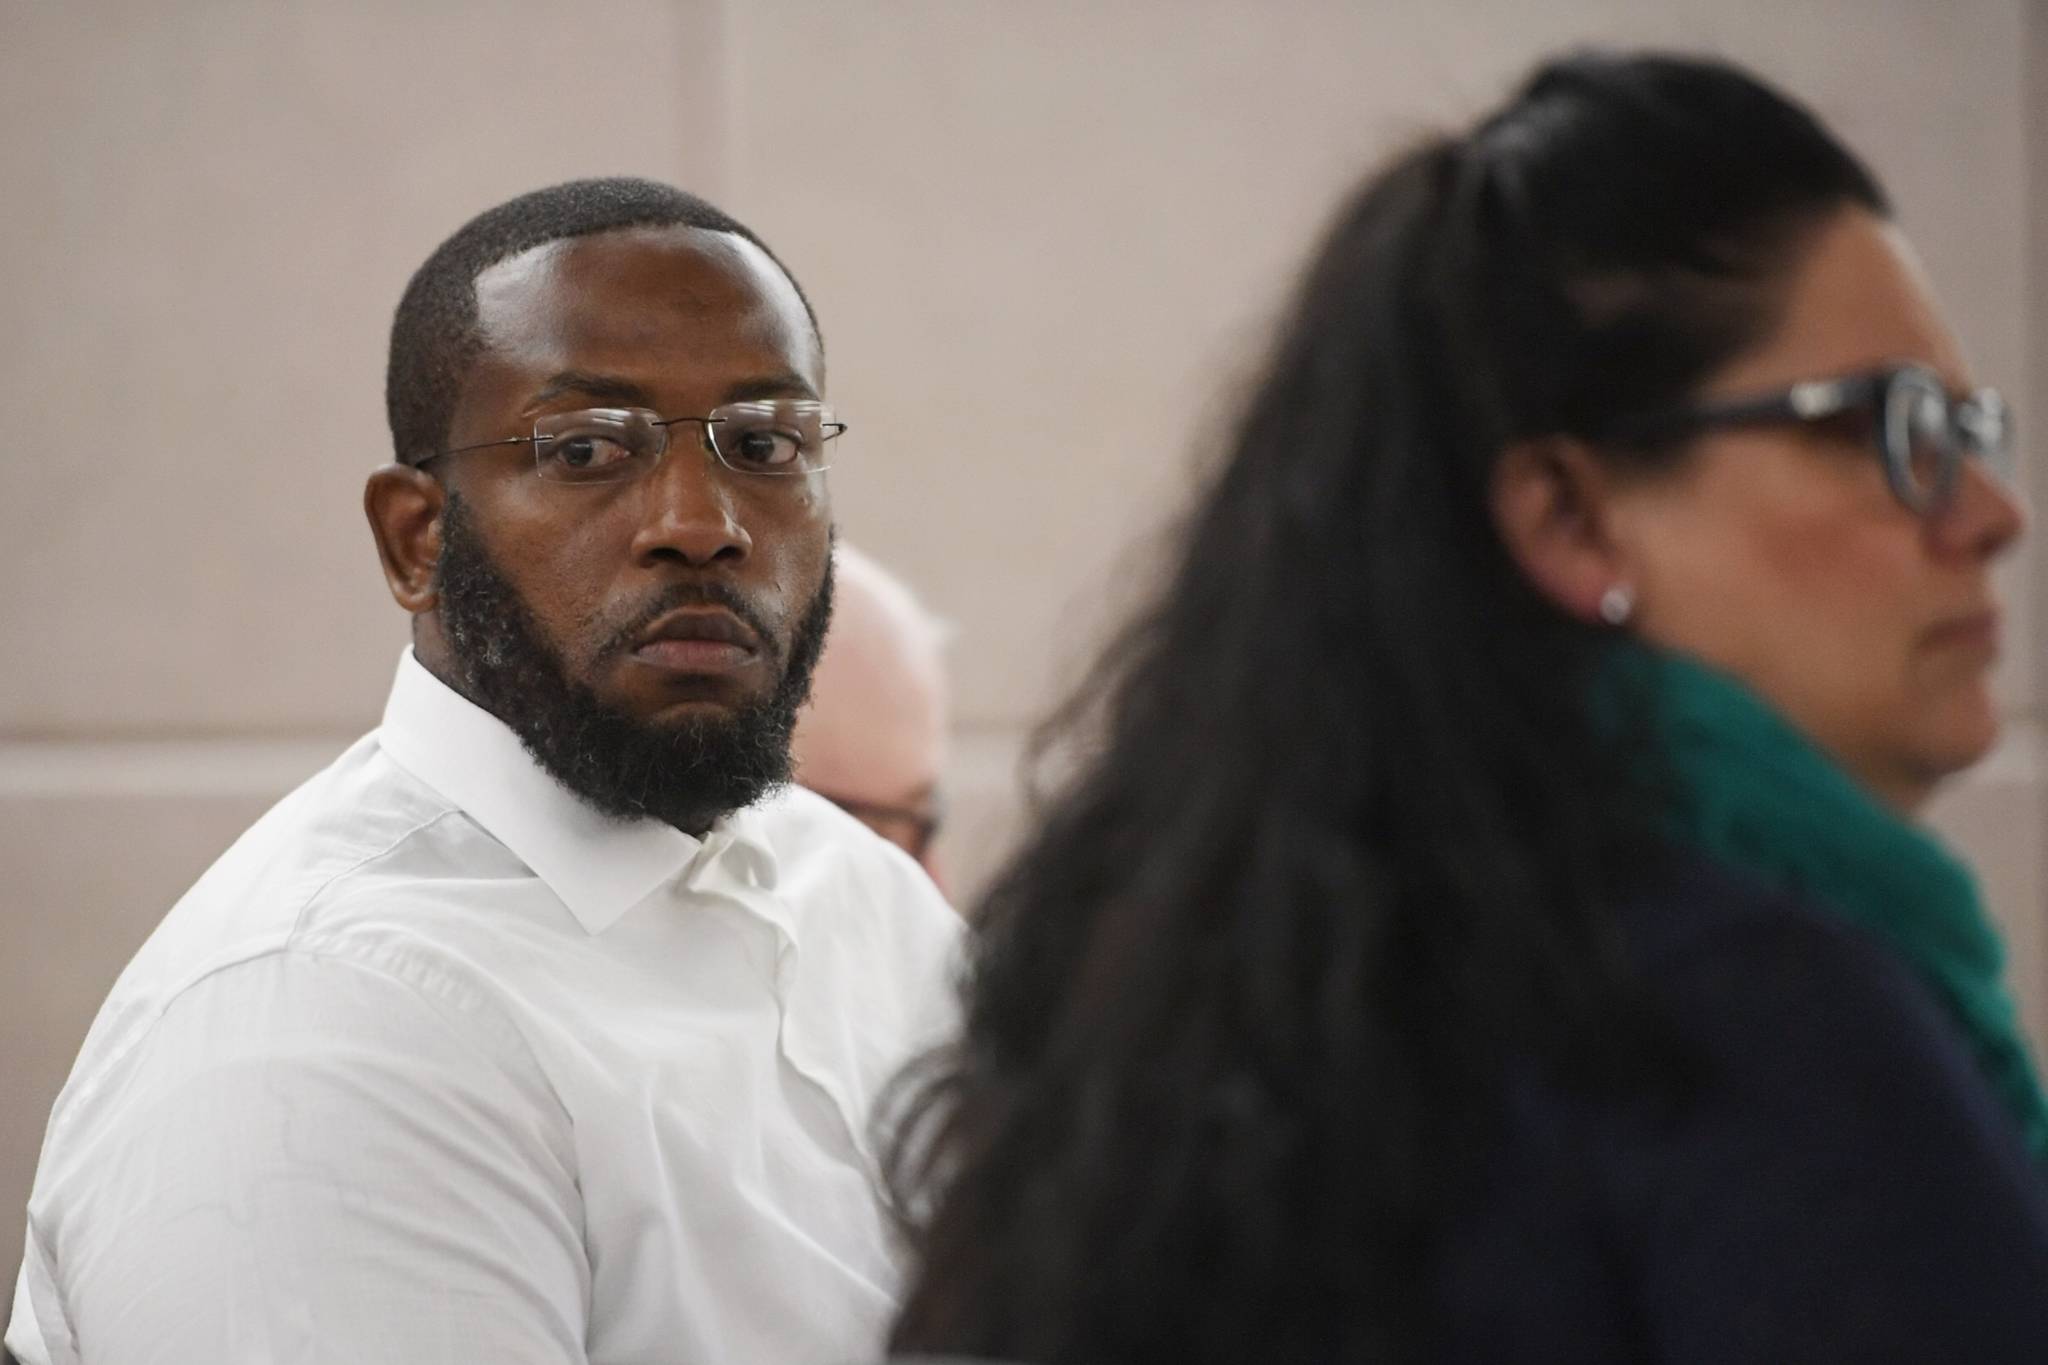 Laron Carlton Graham listens to his attorney, Natasha Norris, in Juneau Superior Court on Tuesday, Sept. 3, 2019, during his trial on two counts of first-degree murder for the Nov. 15, 2015 shooting deaths of 36-year-old Robert H. Meireis and 34-year-old Elizabeth K. Tonsmeire. (Michael Penn | Juneau Empire)